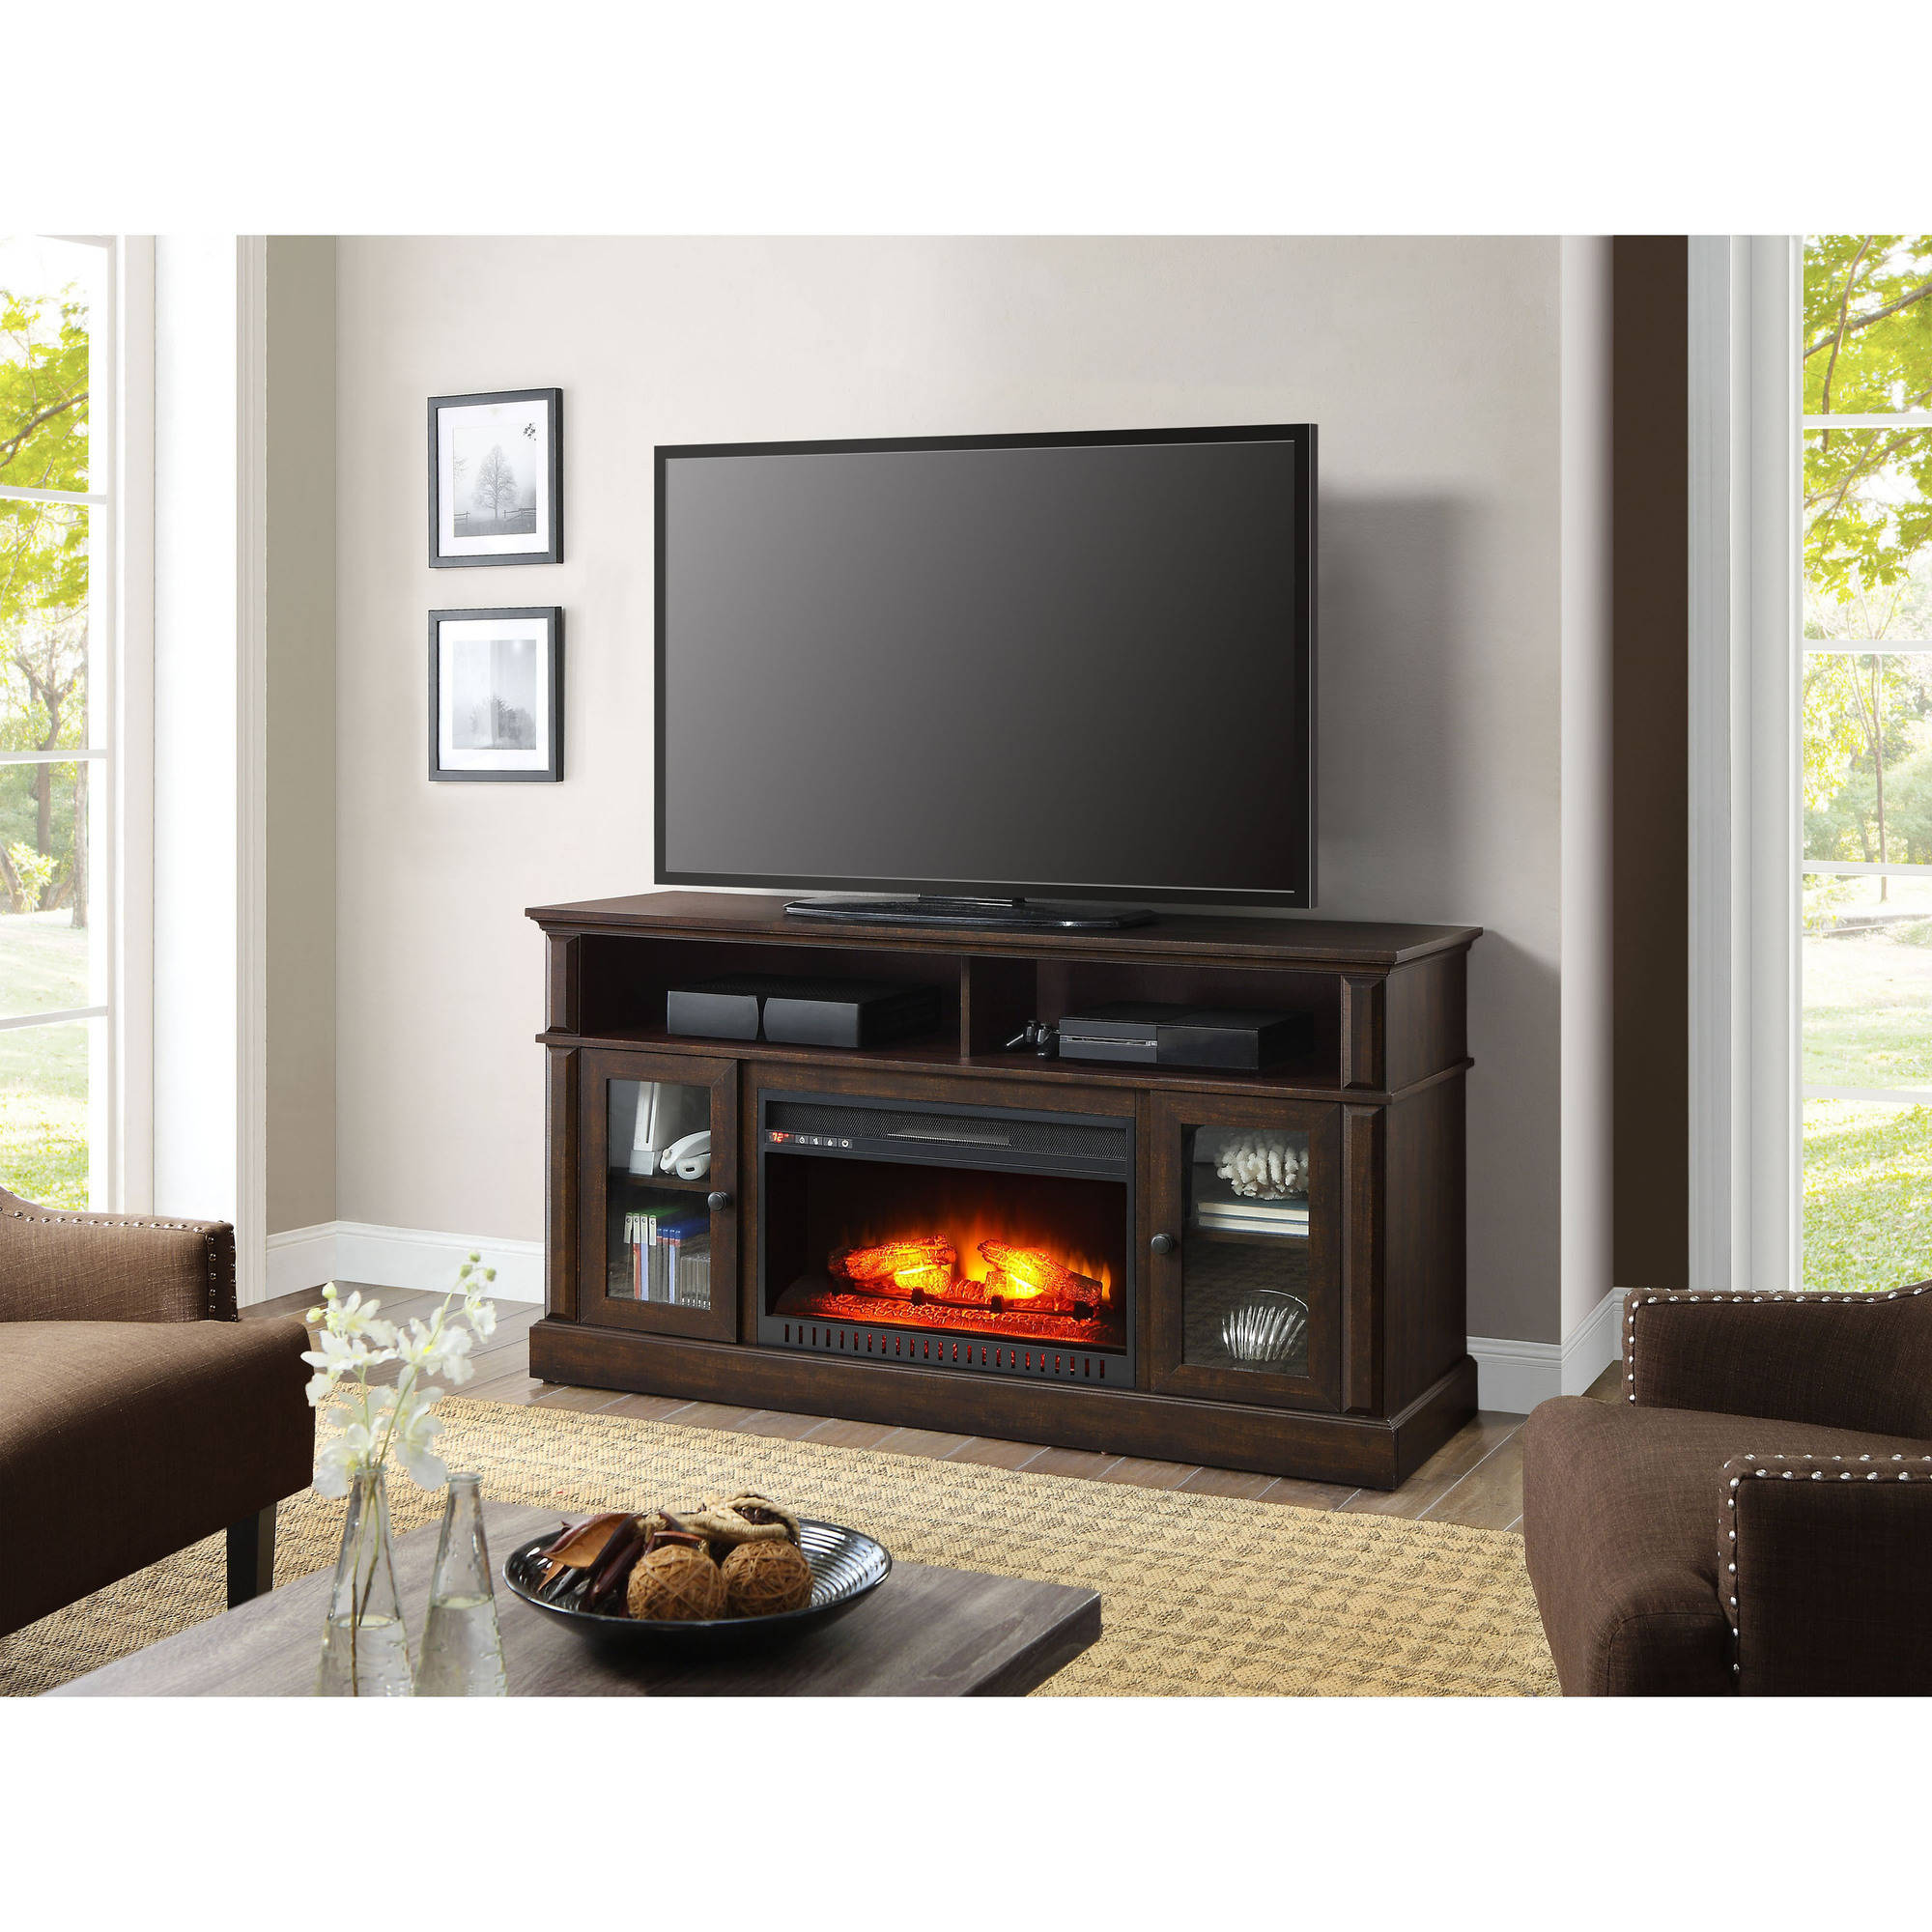 Portable Fireplace Tv Stand Best Of Whalen Barston Media Fireplace for Tv S Up to 70 Multiple